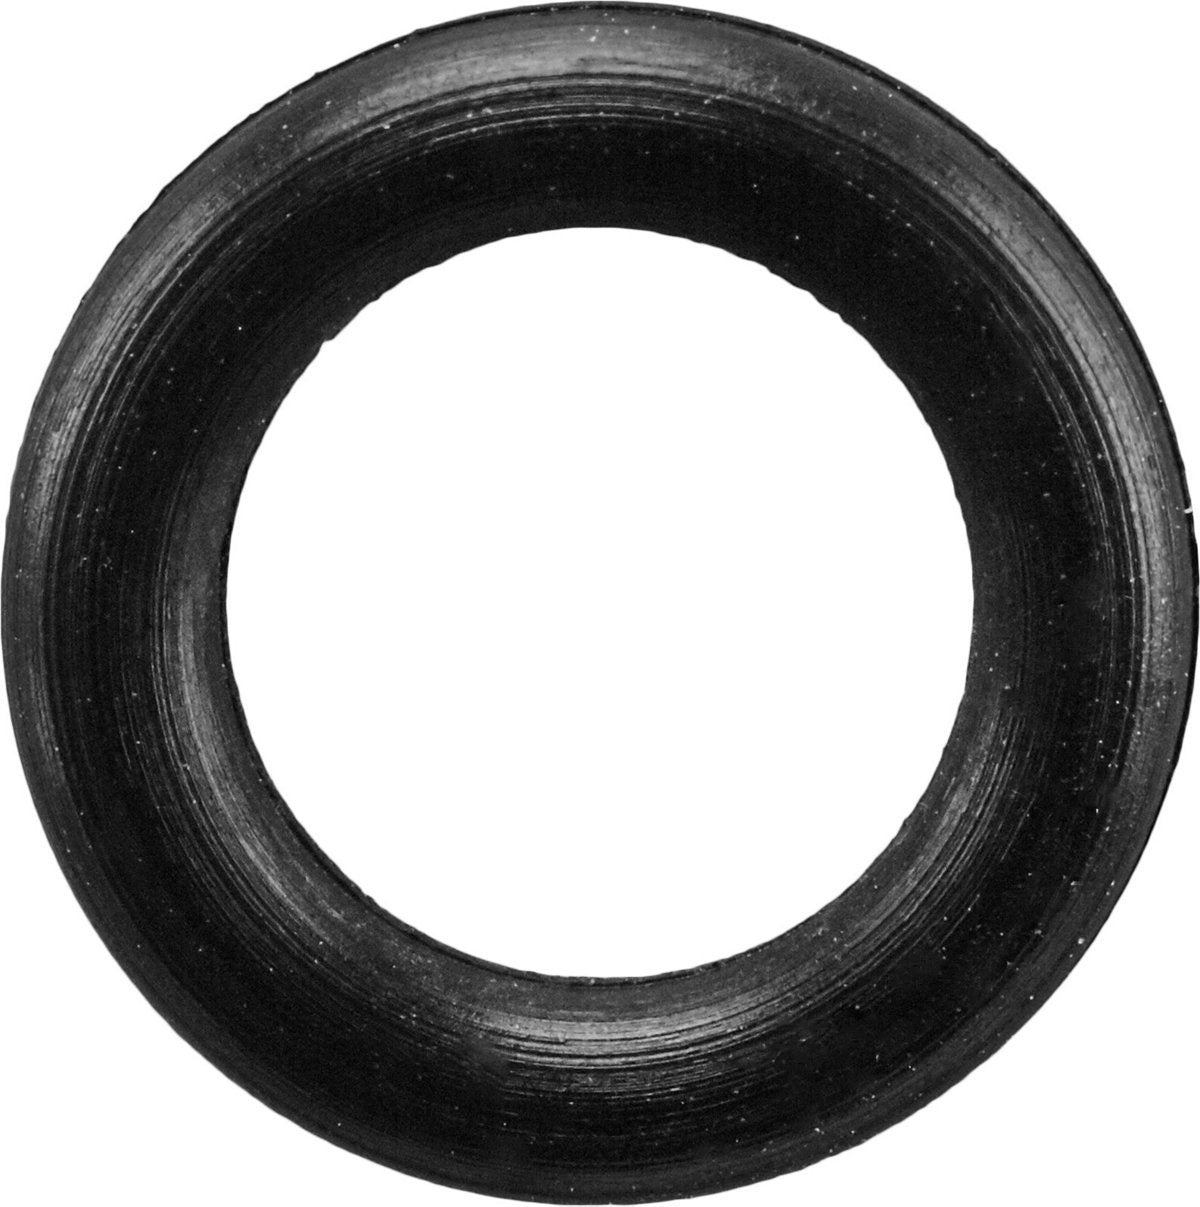 Replacement O-Rings _Black